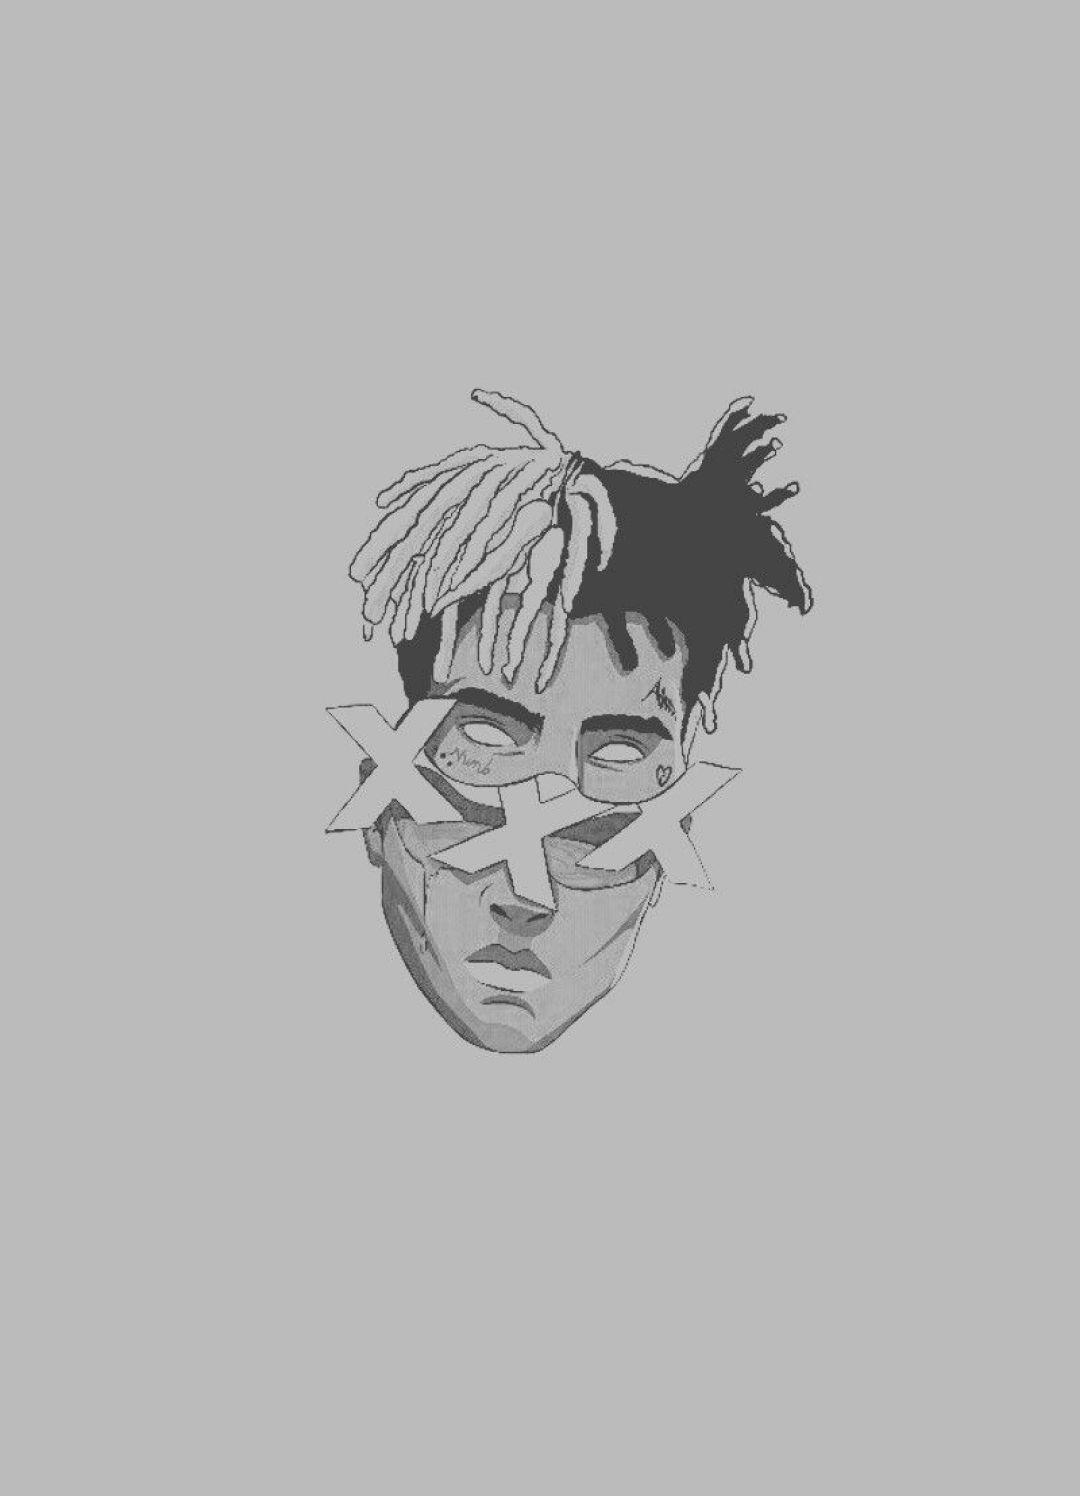 Anime Xxxtentacion Drawing Wallpapers Wallpaper Cave Check out our anime drawing selection for the very best in unique or custom, handmade pieces from our digital shops. anime xxxtentacion drawing wallpapers